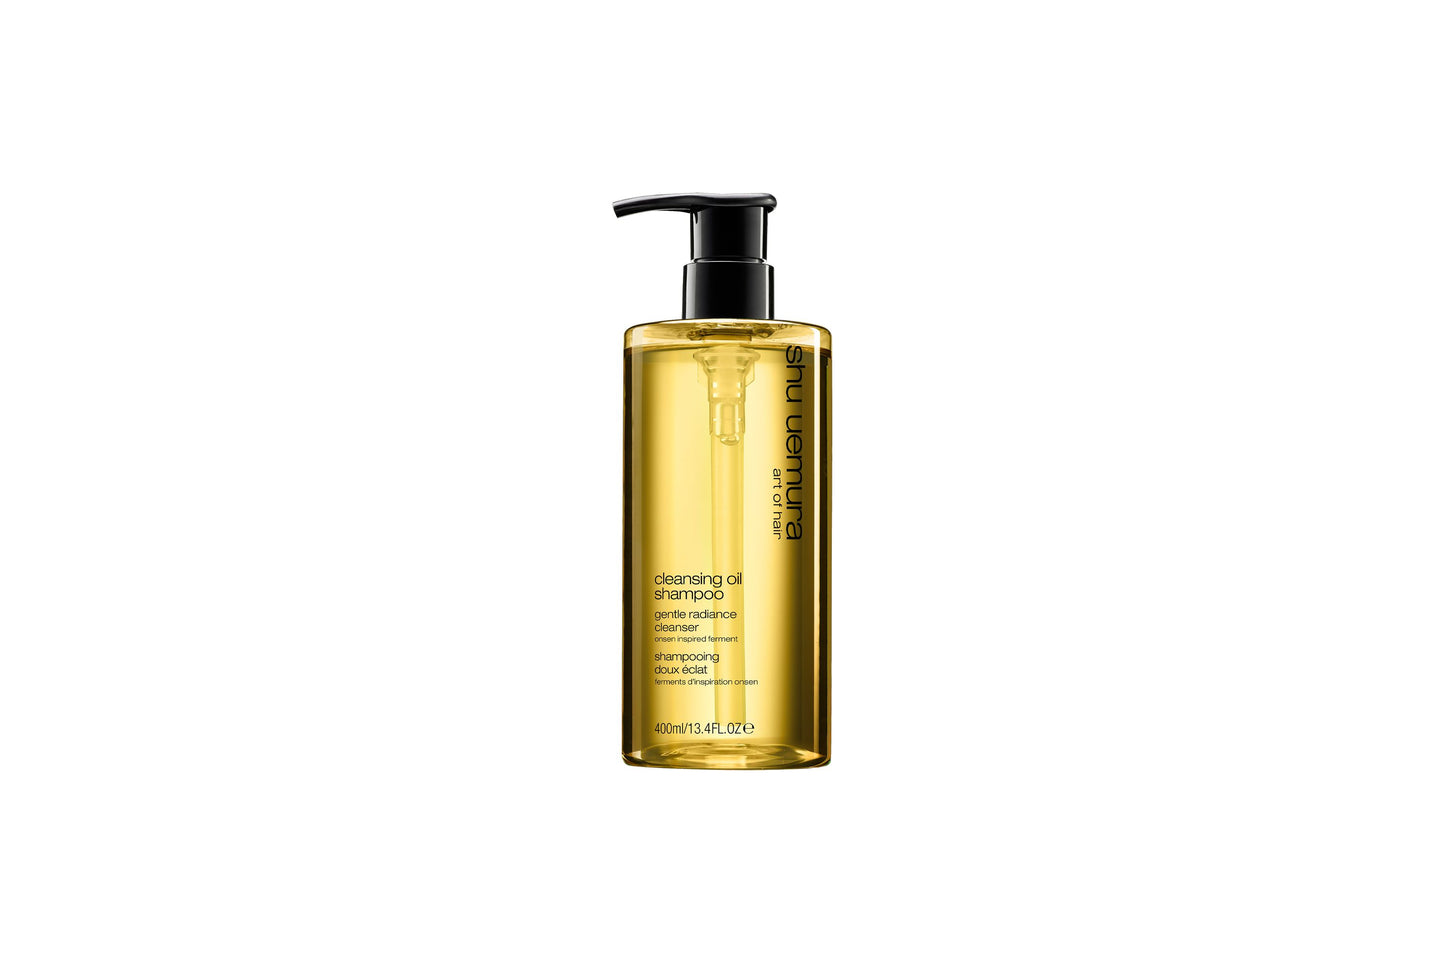 CLEANSING OIL GENTLE RADIANCE CLEANSER